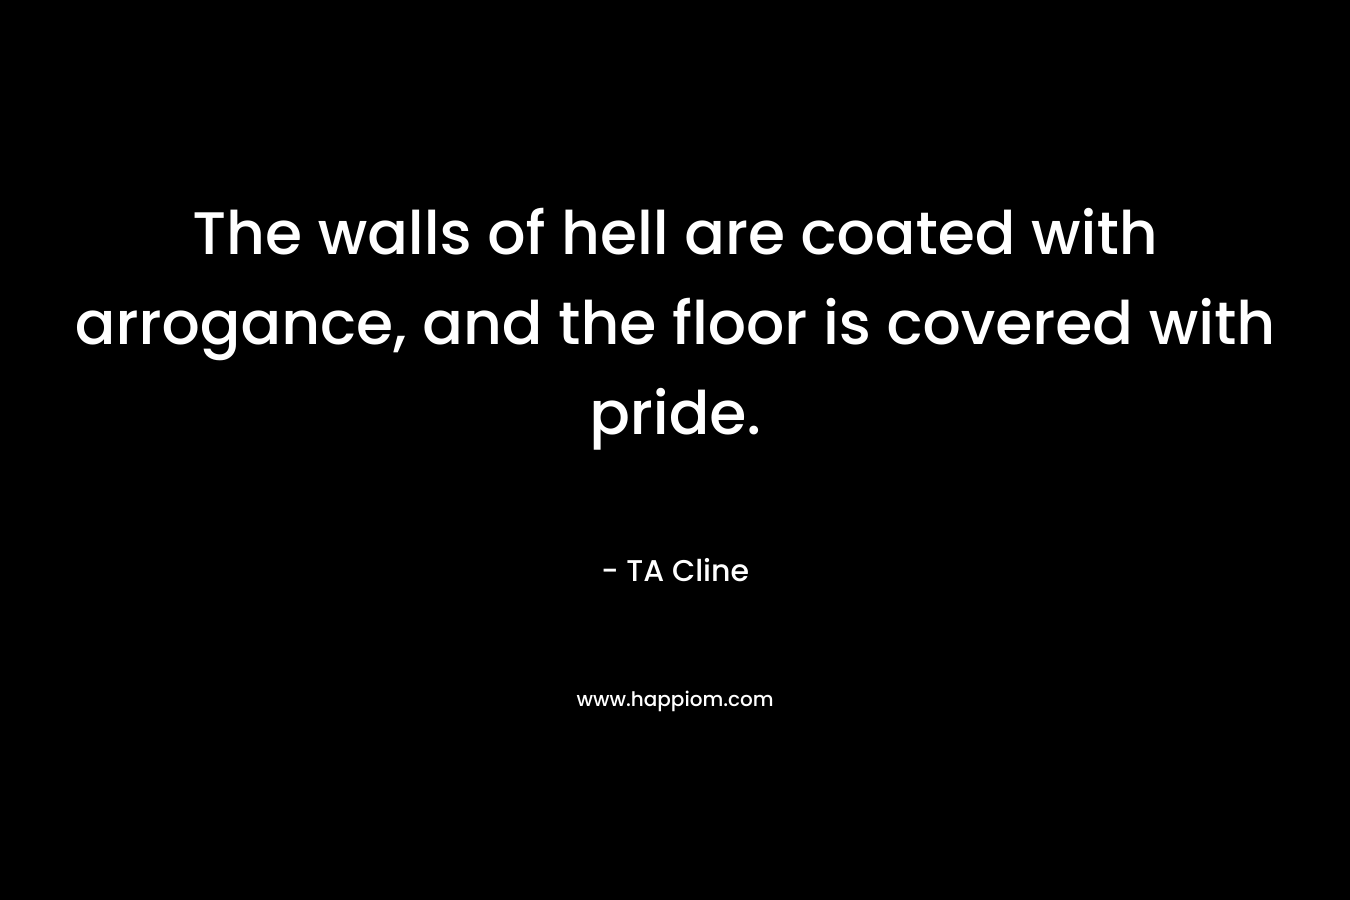 The walls of hell are coated with arrogance, and the floor is covered with pride.